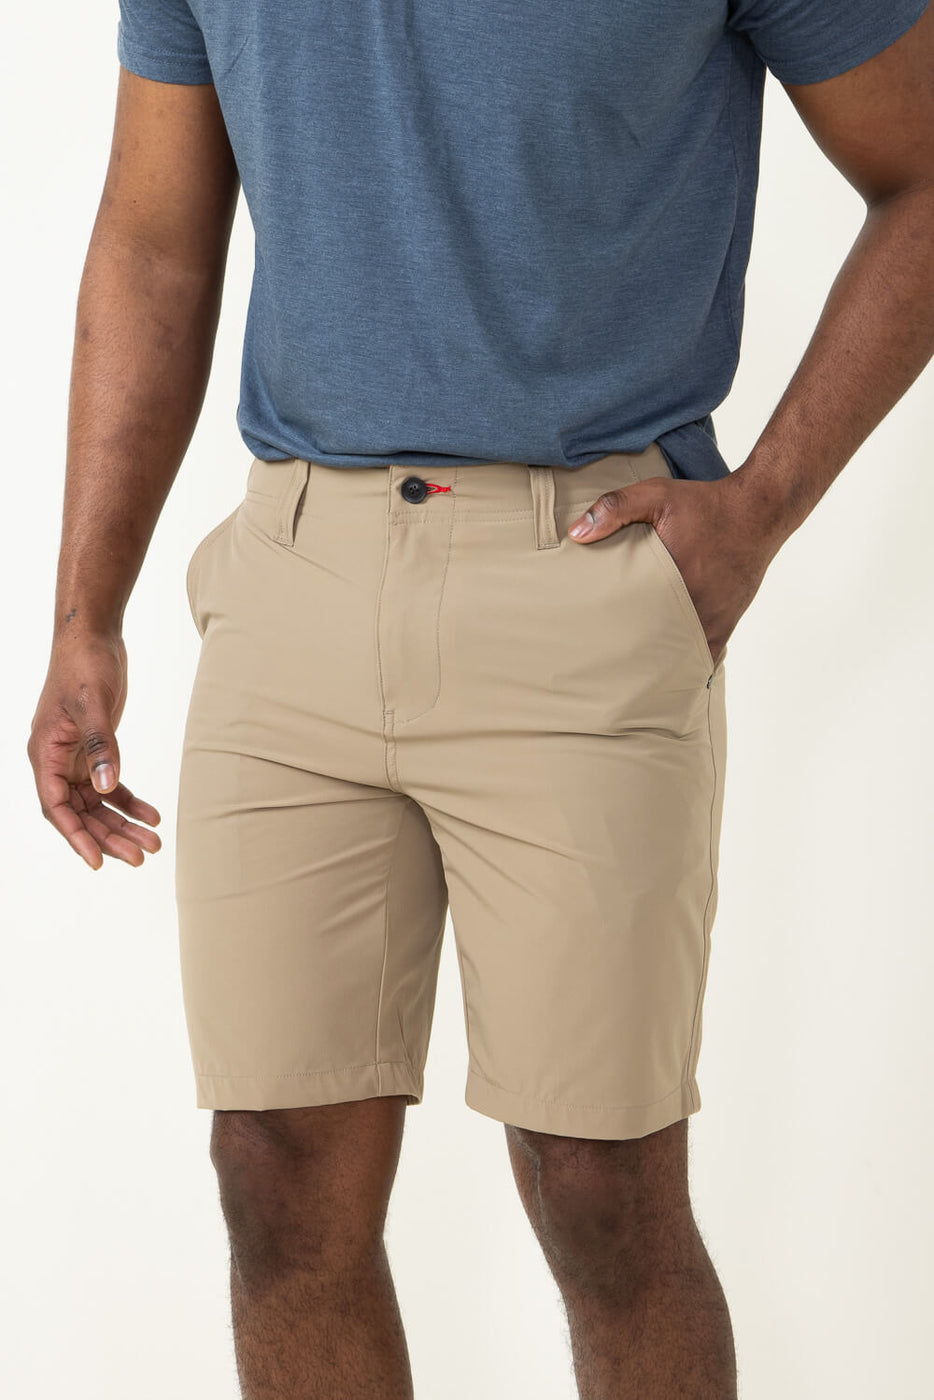 Brown Flat Front Shorts for Men